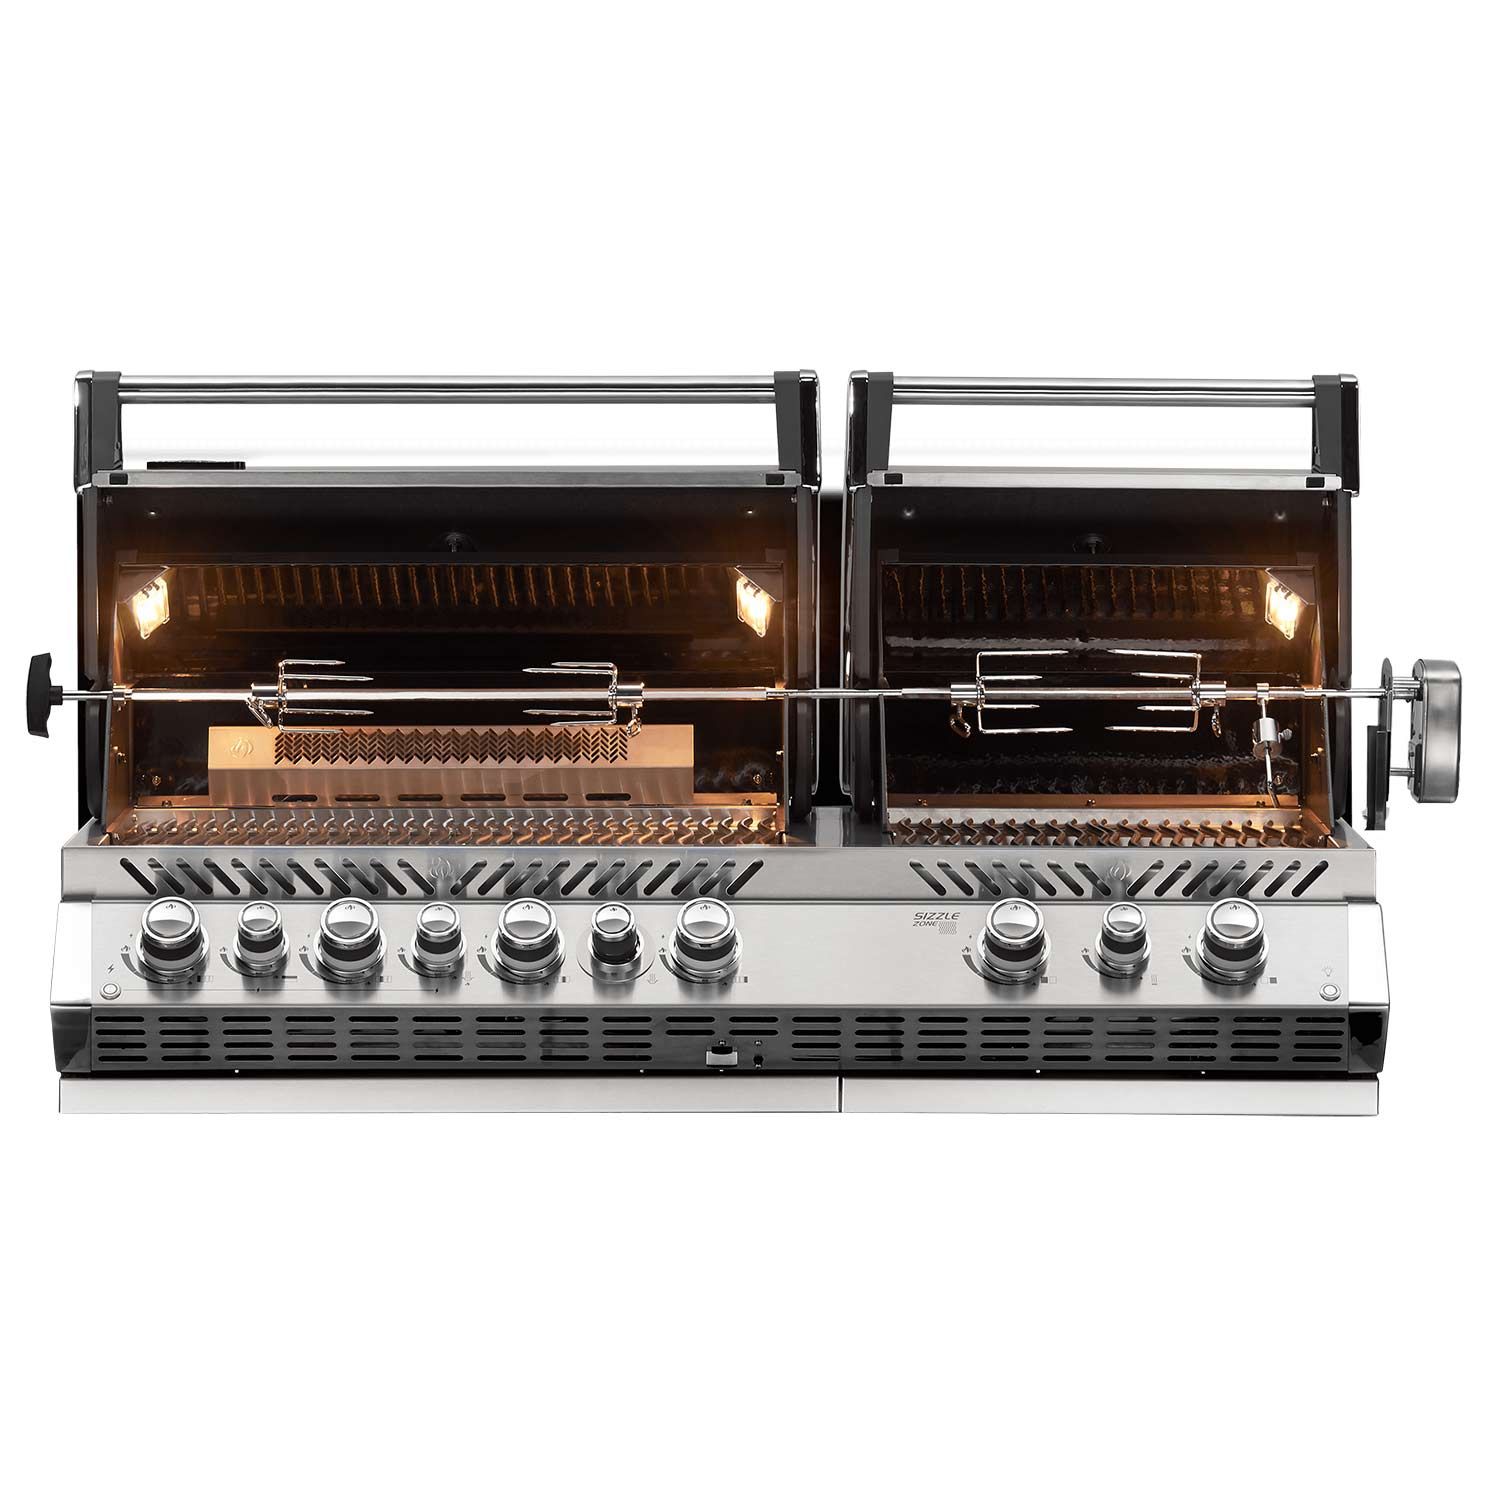 Allergi Poesi mixer Napoleon BIPRO825RBISS-3 Prestige PRO 825 Built-In Gas Grill with Rotisserie